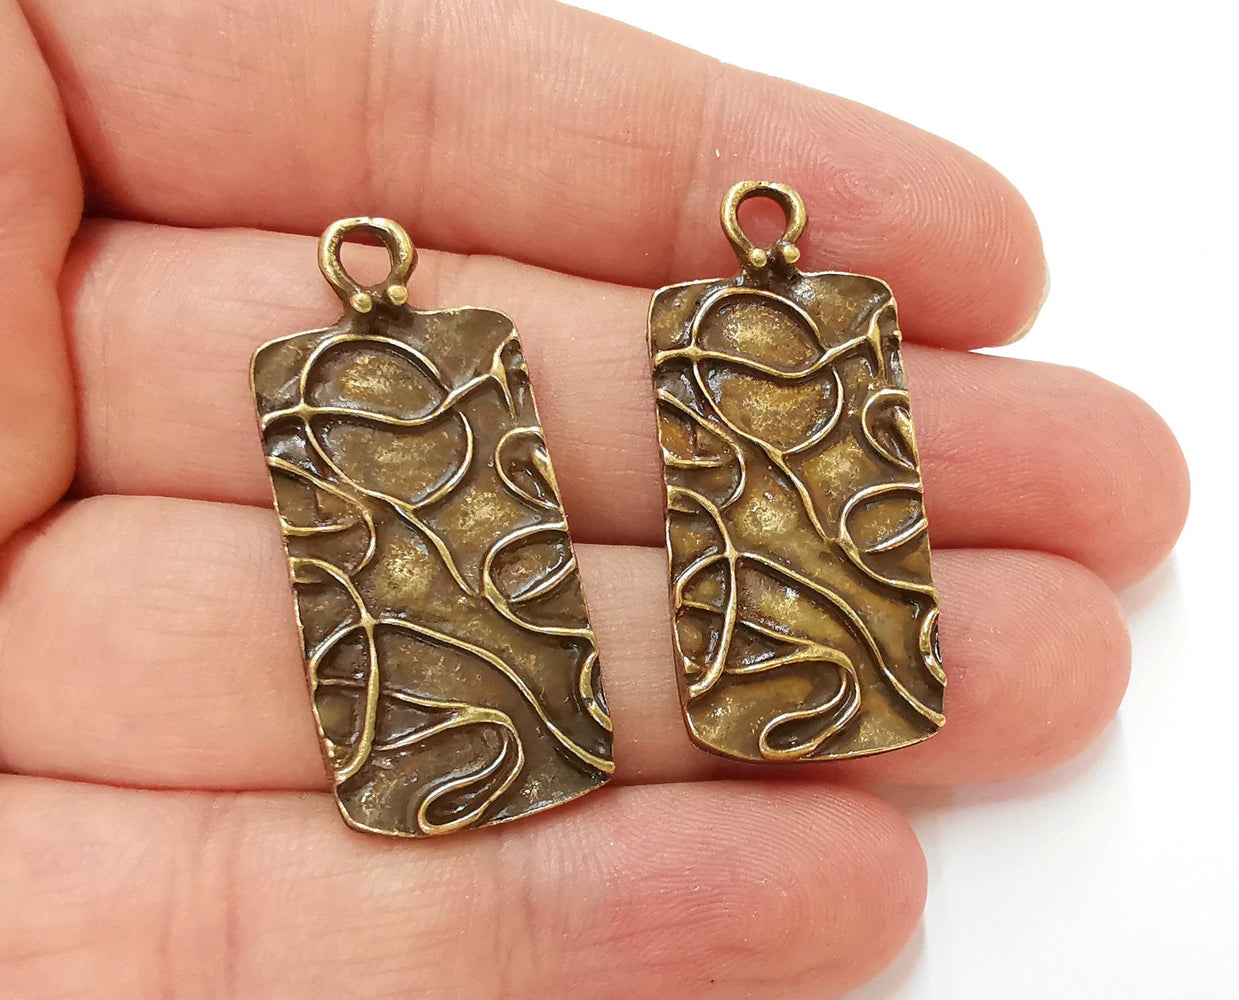 2 Antique Bronze Charms Antique Bronze Plated Charms (40x18mm) G21684